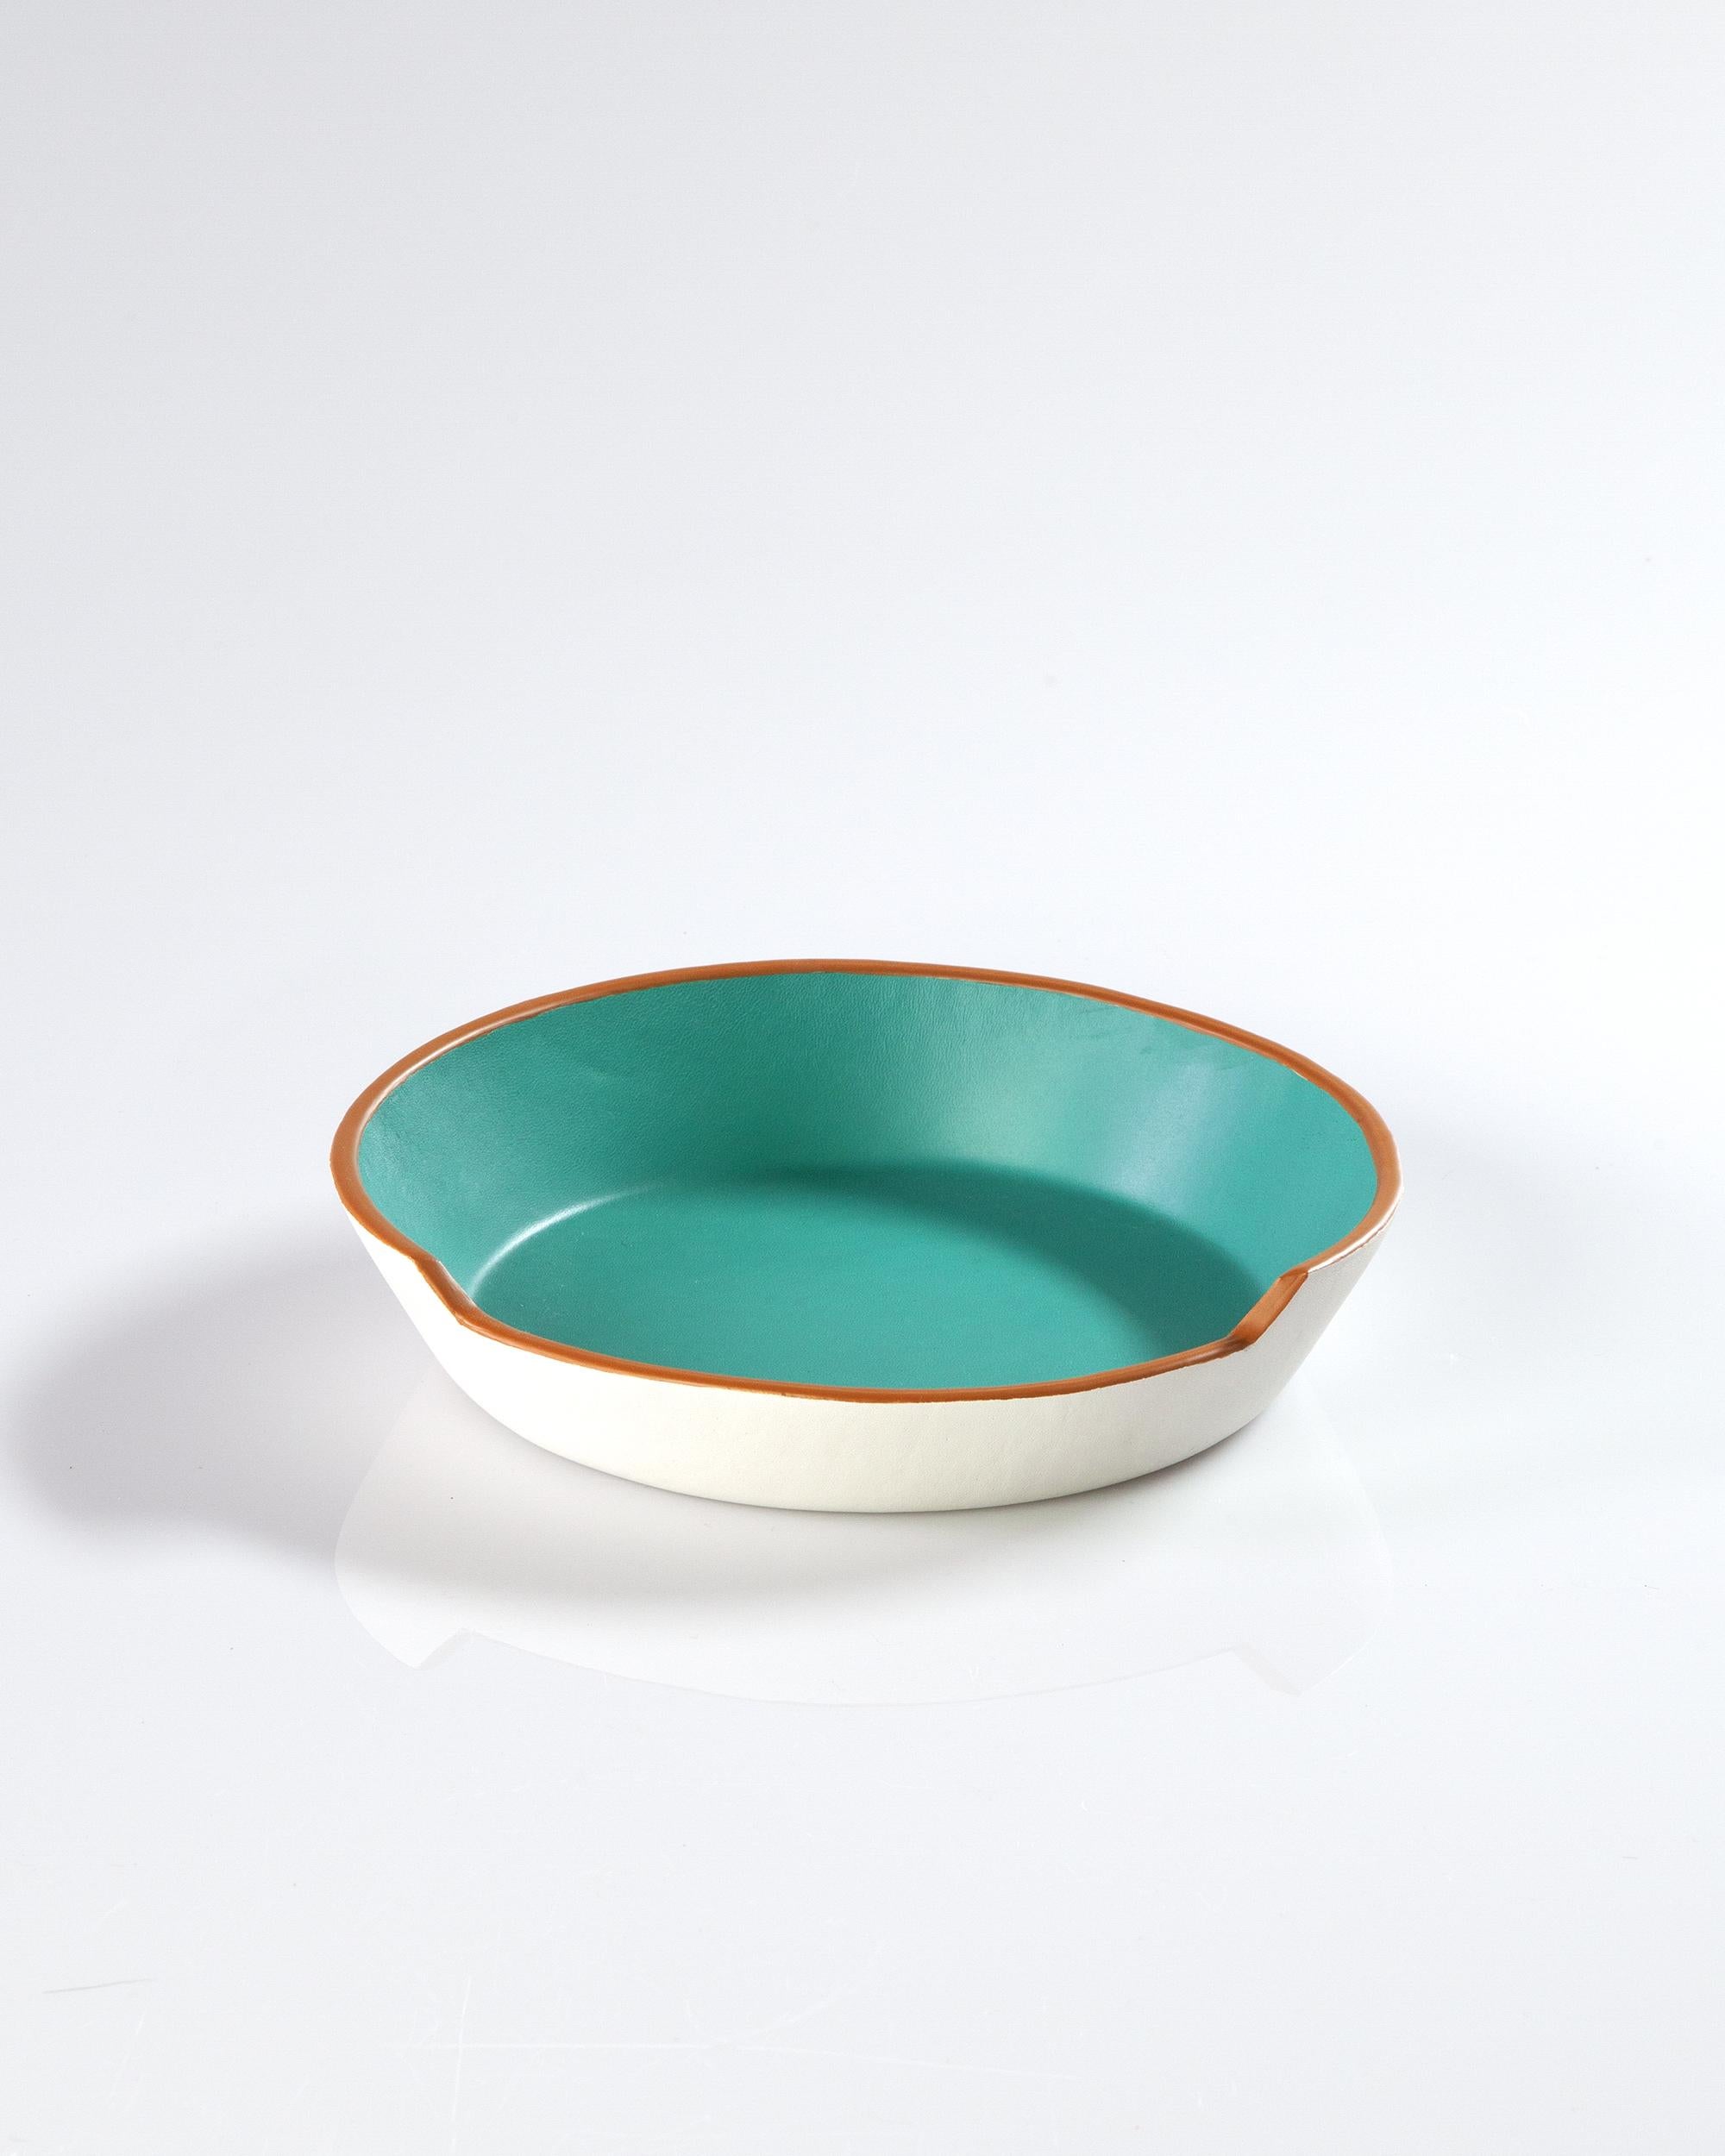 This handmade leather bowl in aqua and white is the perfect addition to complete your dining room table or any room in your home. Rustic charm meets contemporary handcrafted design sensibility in this exquisite bowl. Featuring a unique asymmetrical